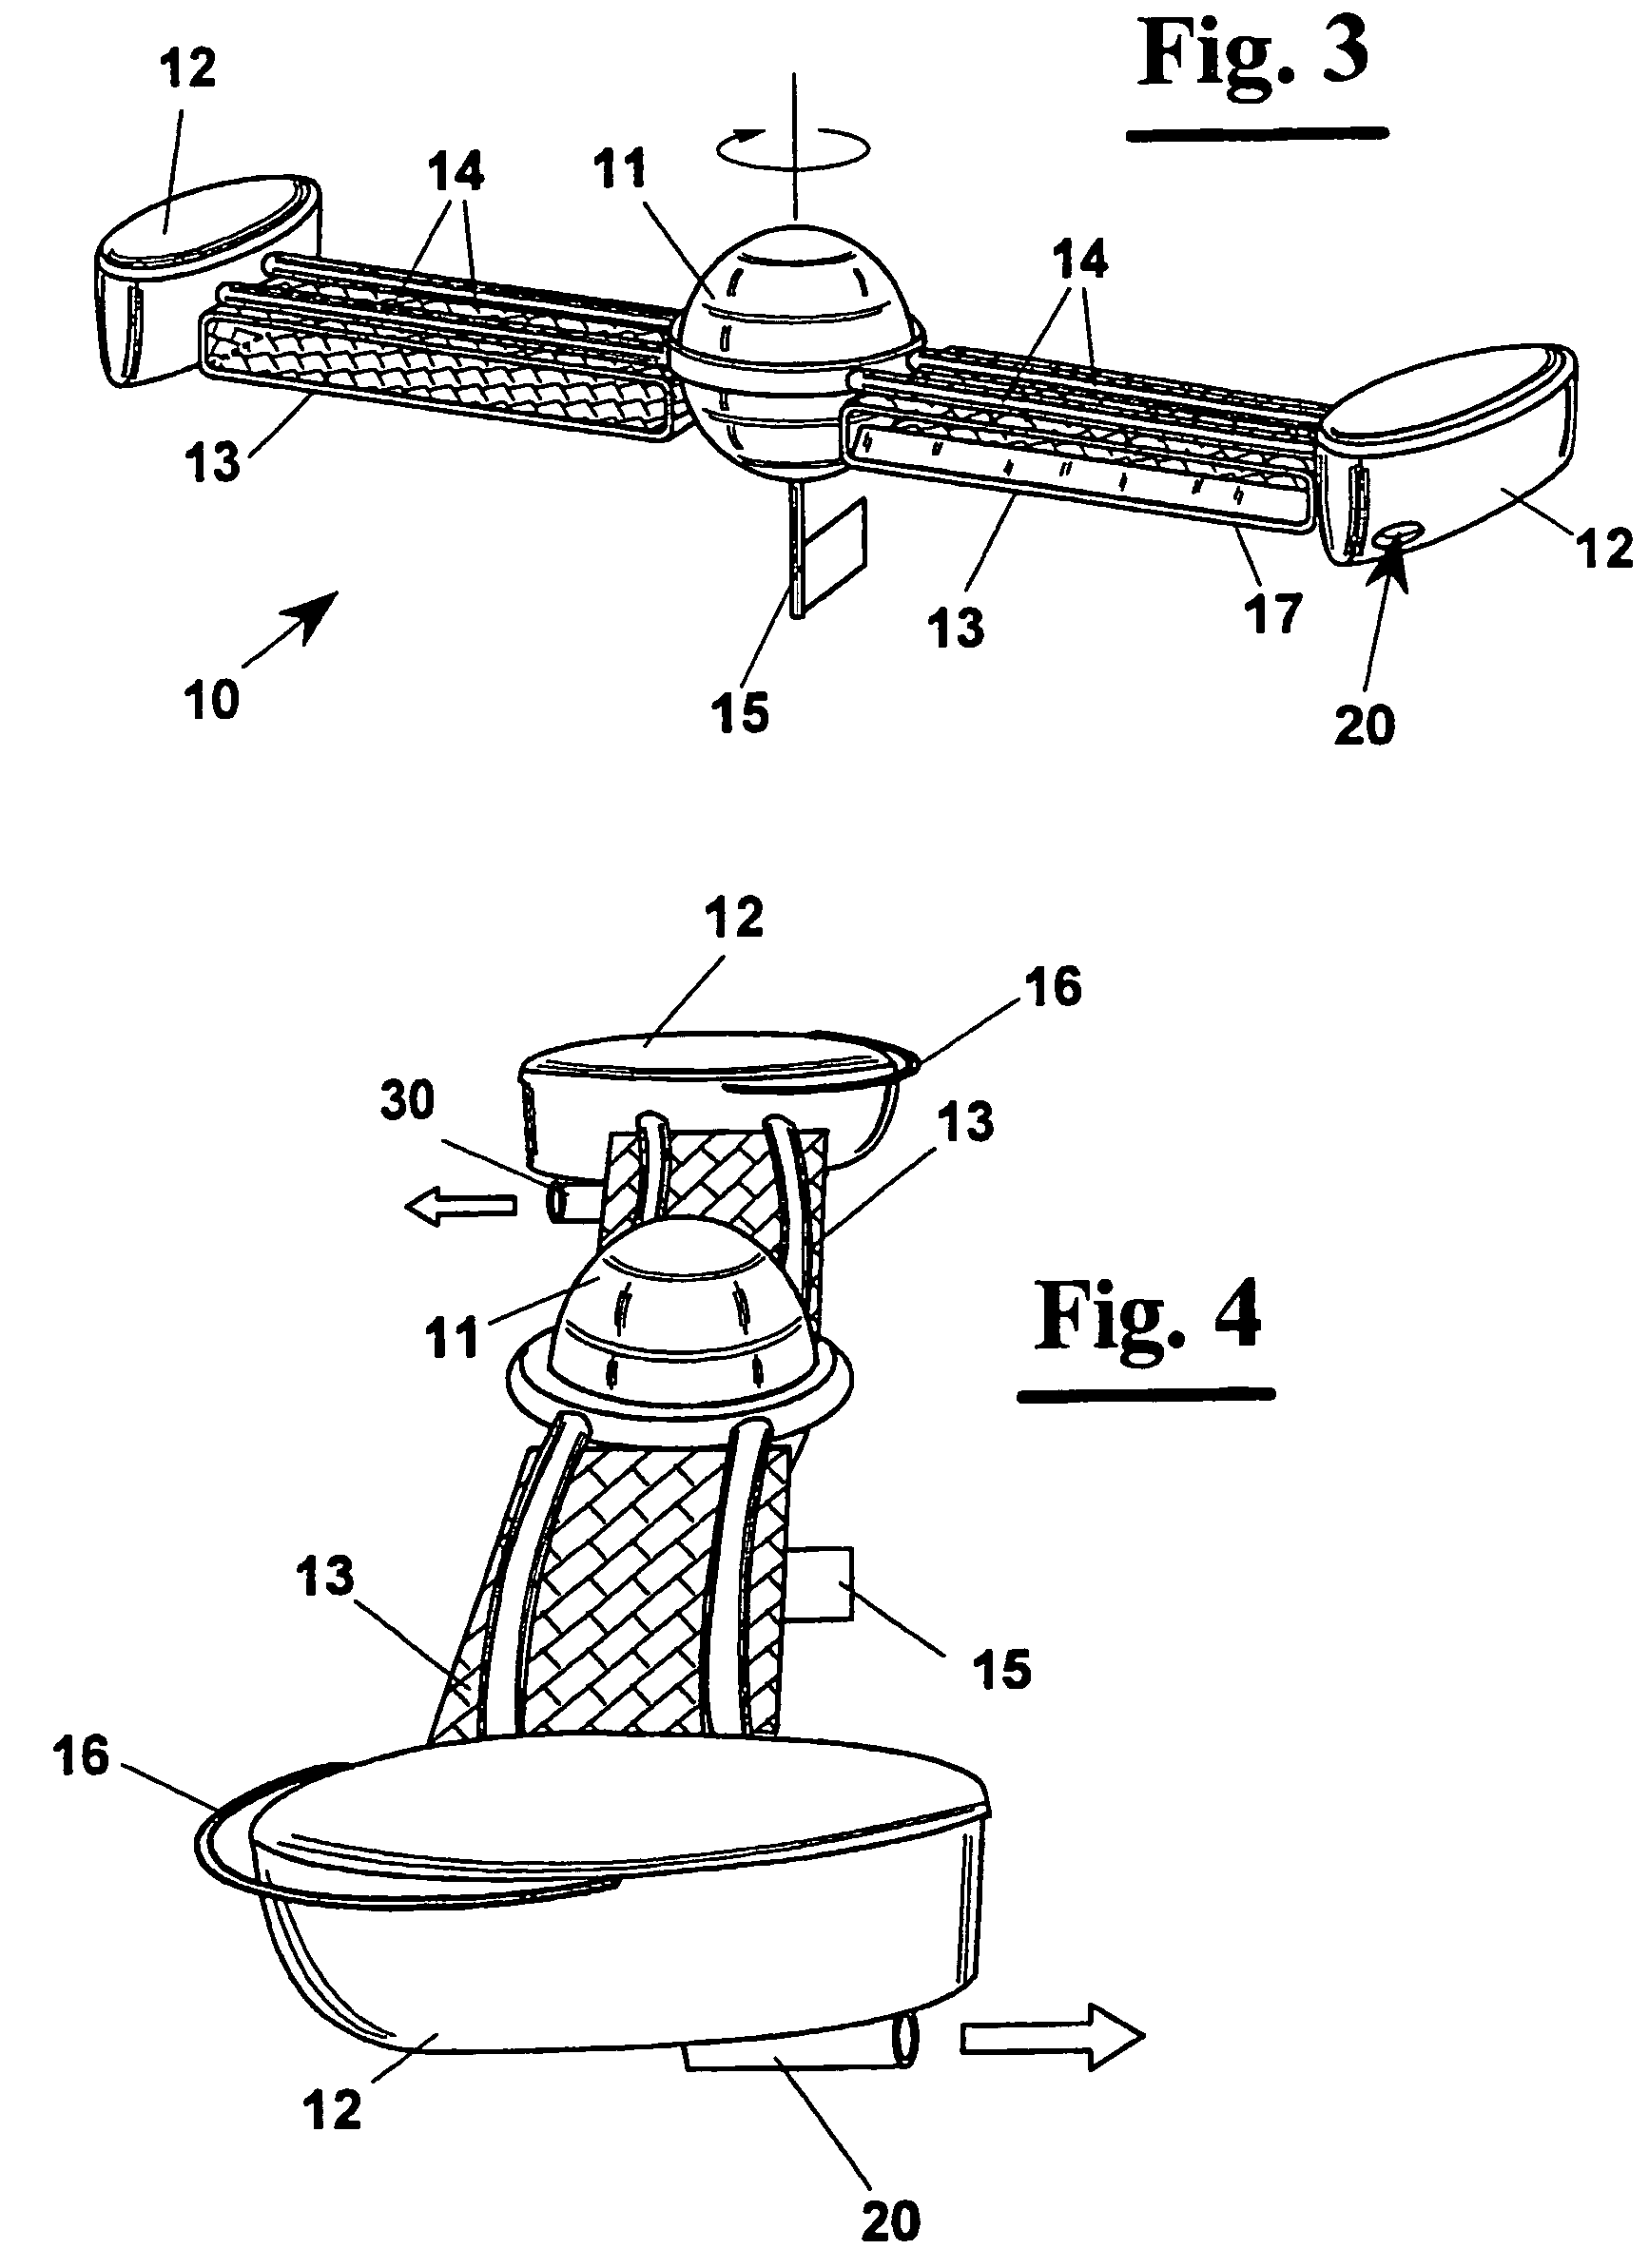 Self-propelled floating device for cleaning water surfaces